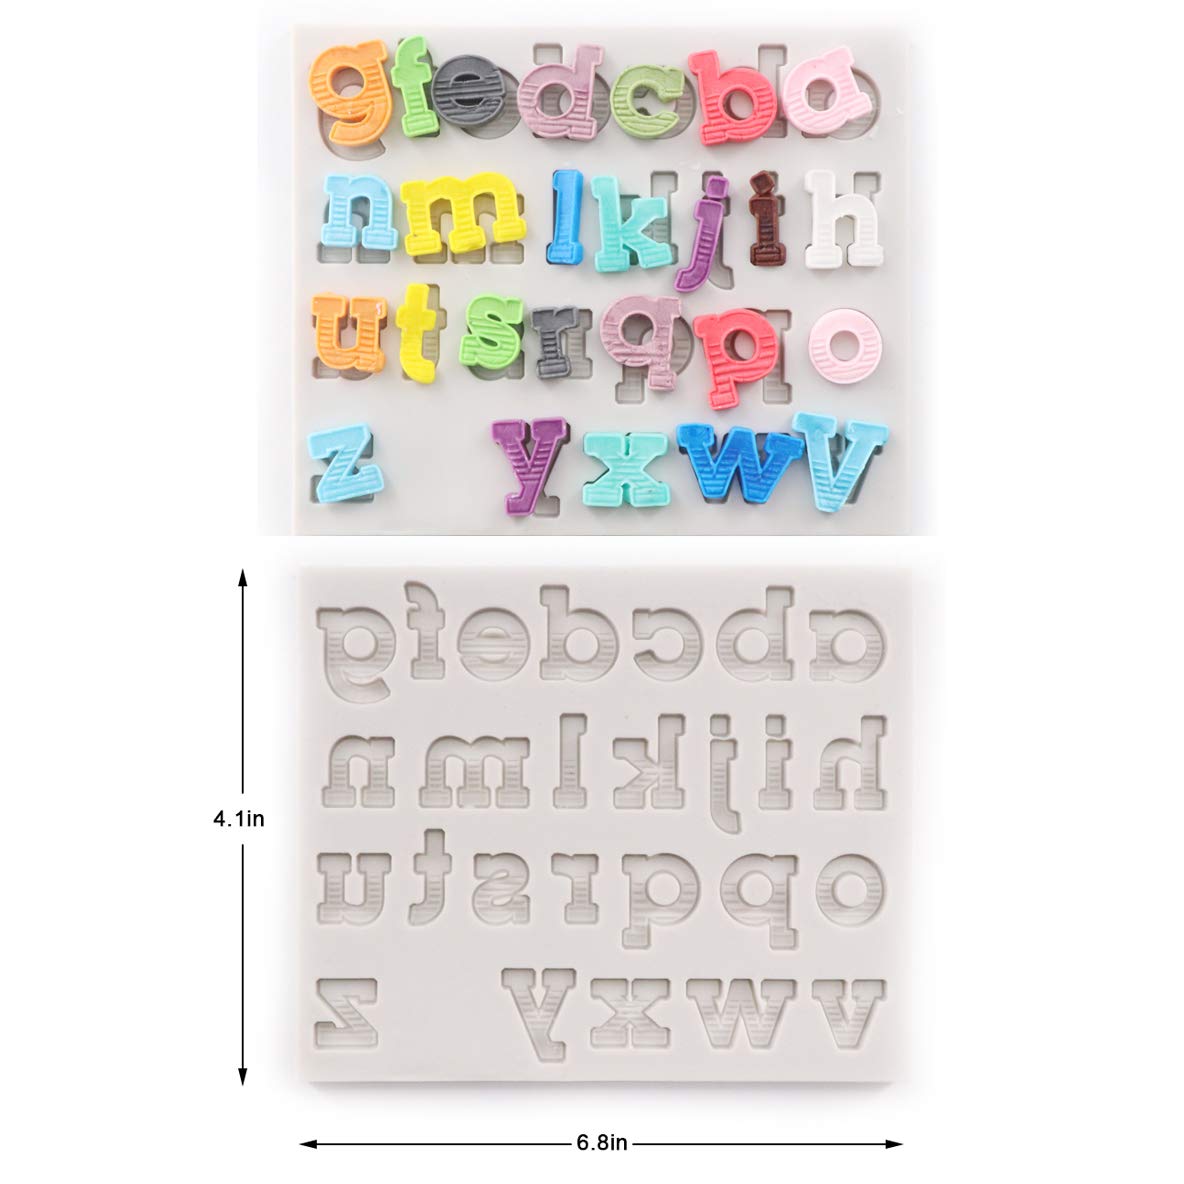 kowanii Alphabet Fondant Silicone Mold for Baby Shower, 3D Silicone Gumpaste Mold Fondant Tools and Accessories Cupcake Decorating Supplies 3 Pack